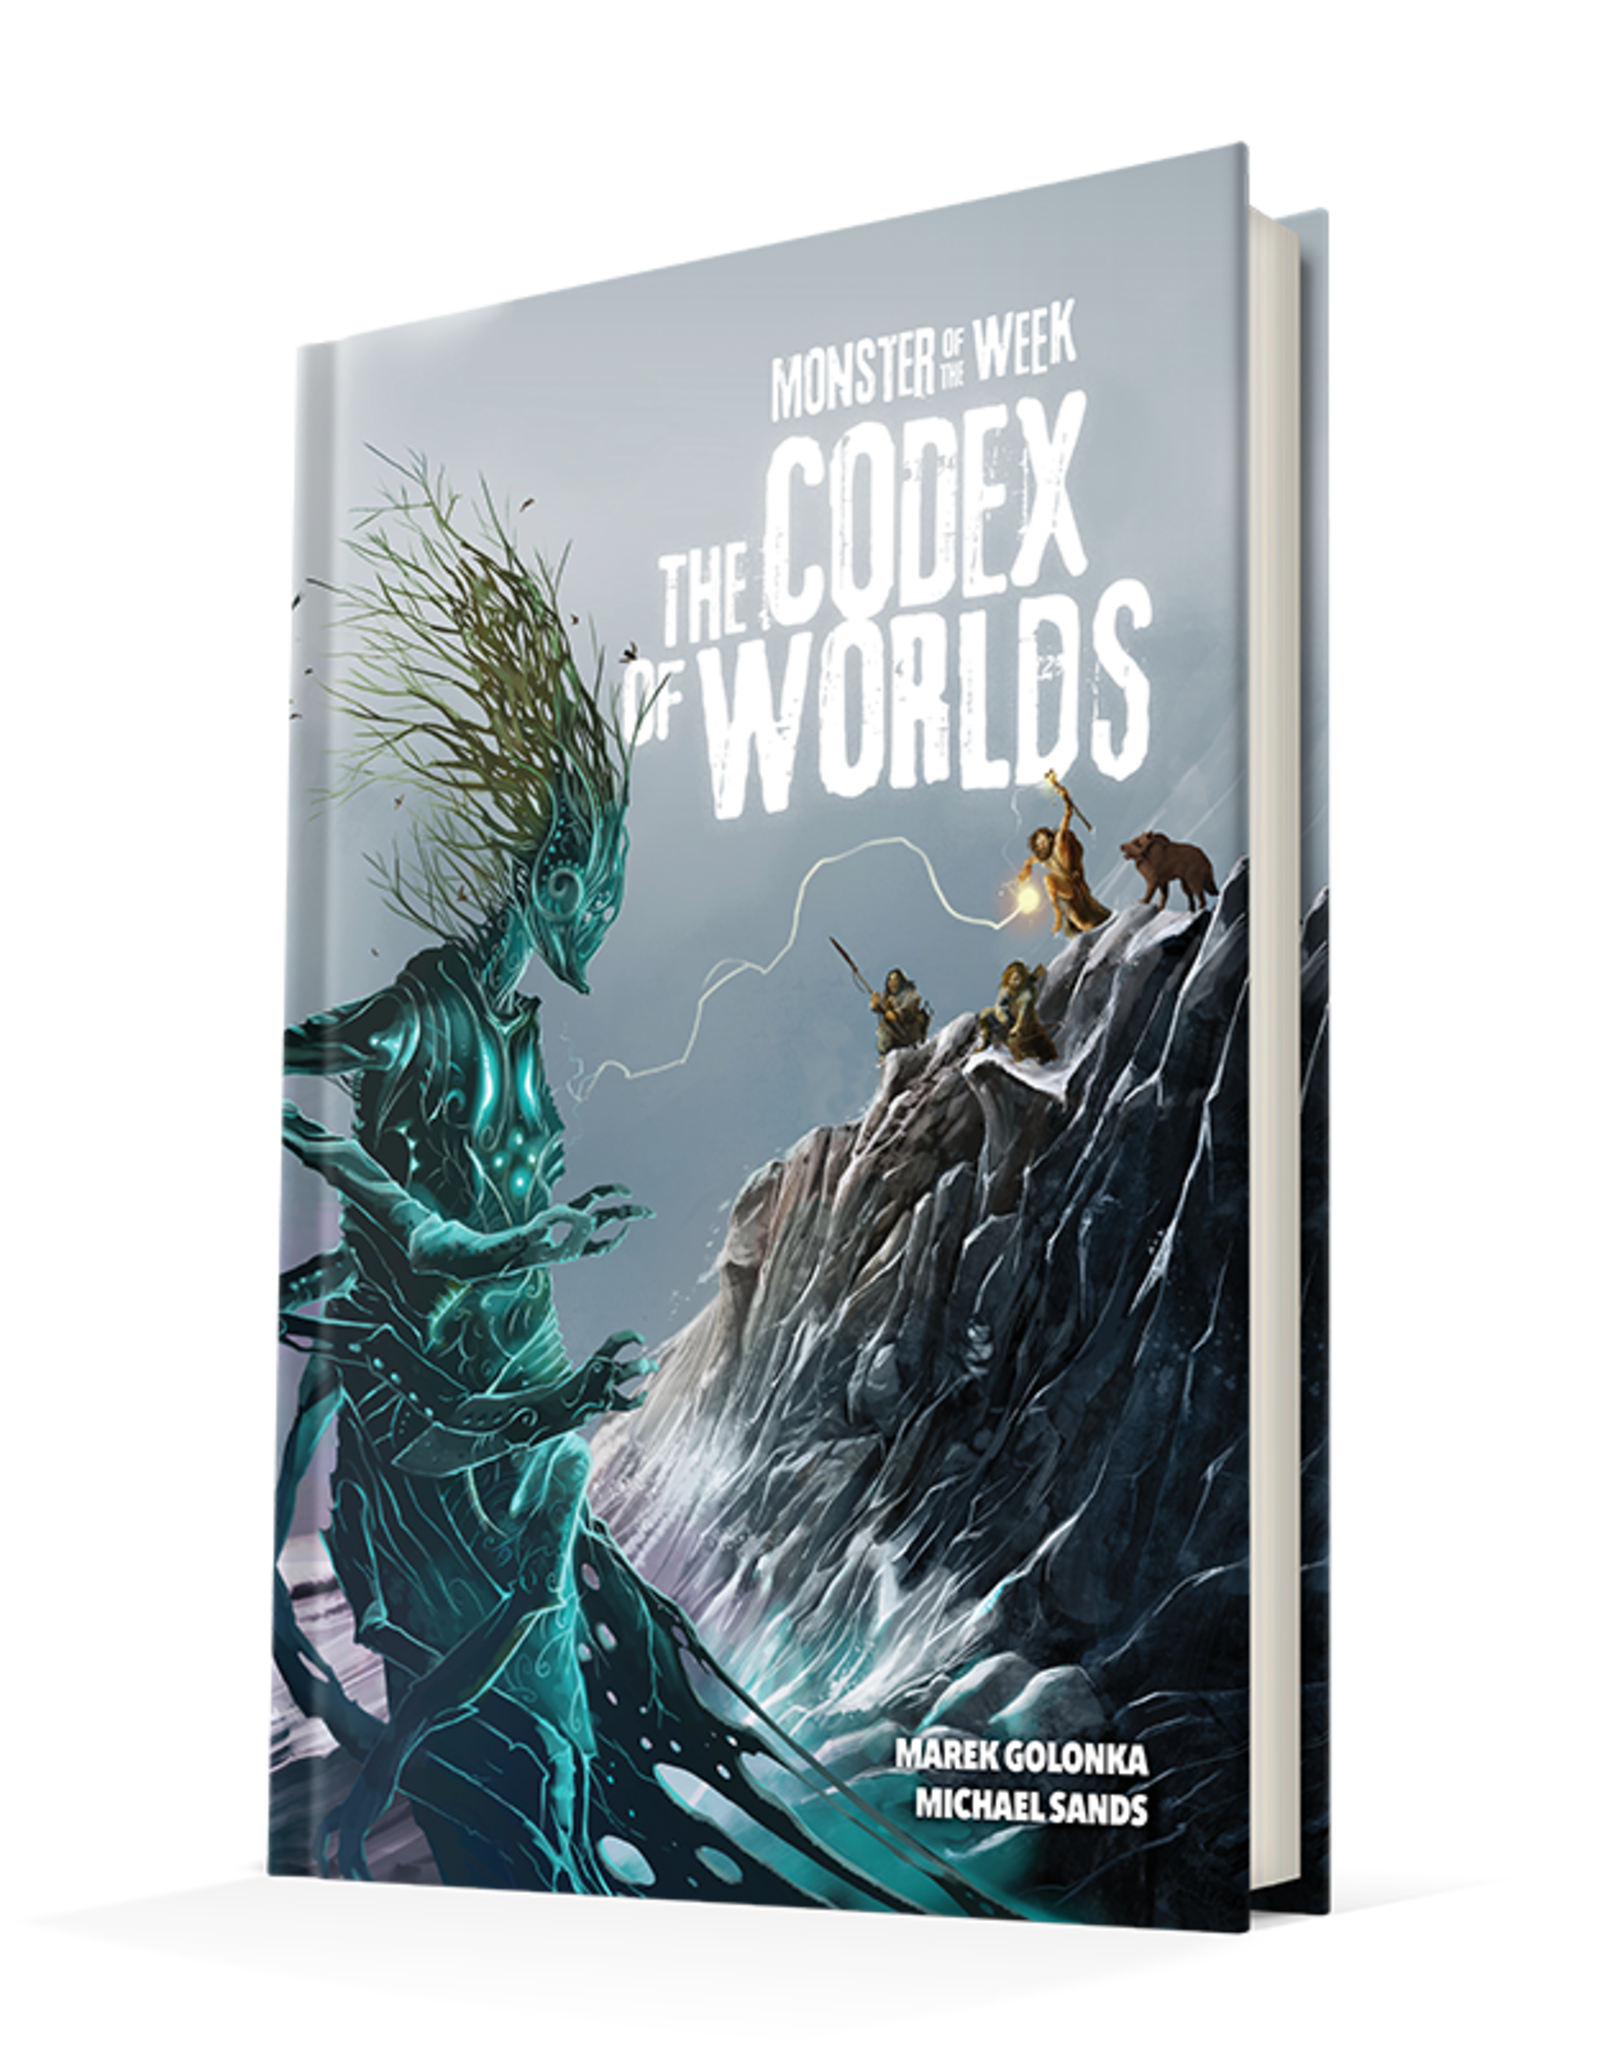 Monster of the Week: The Codex of Worlds